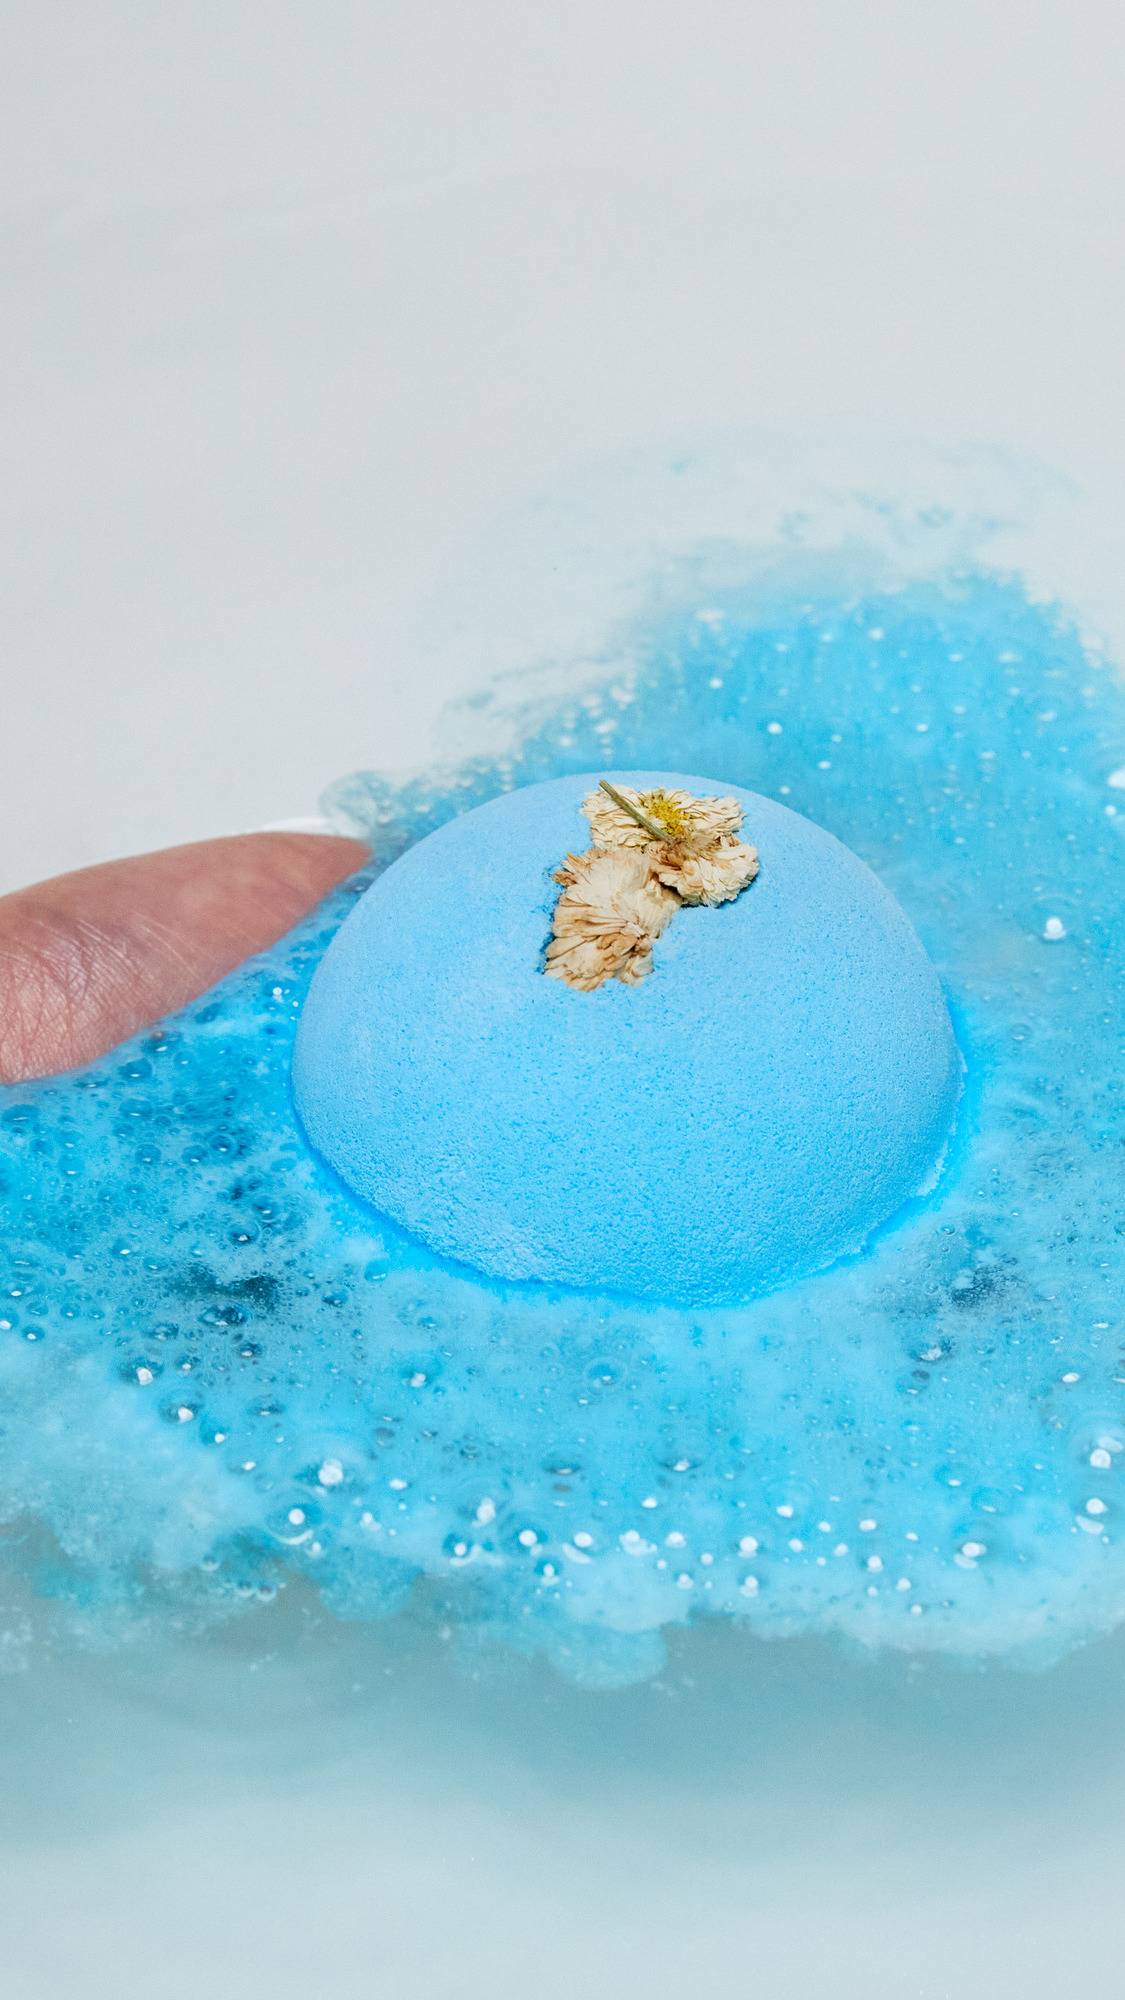 The One With Chamomile bath bomb is being placed into the bath and is slowly dissolving creating a sea of deep blue water and thick, velvety blue foam. 